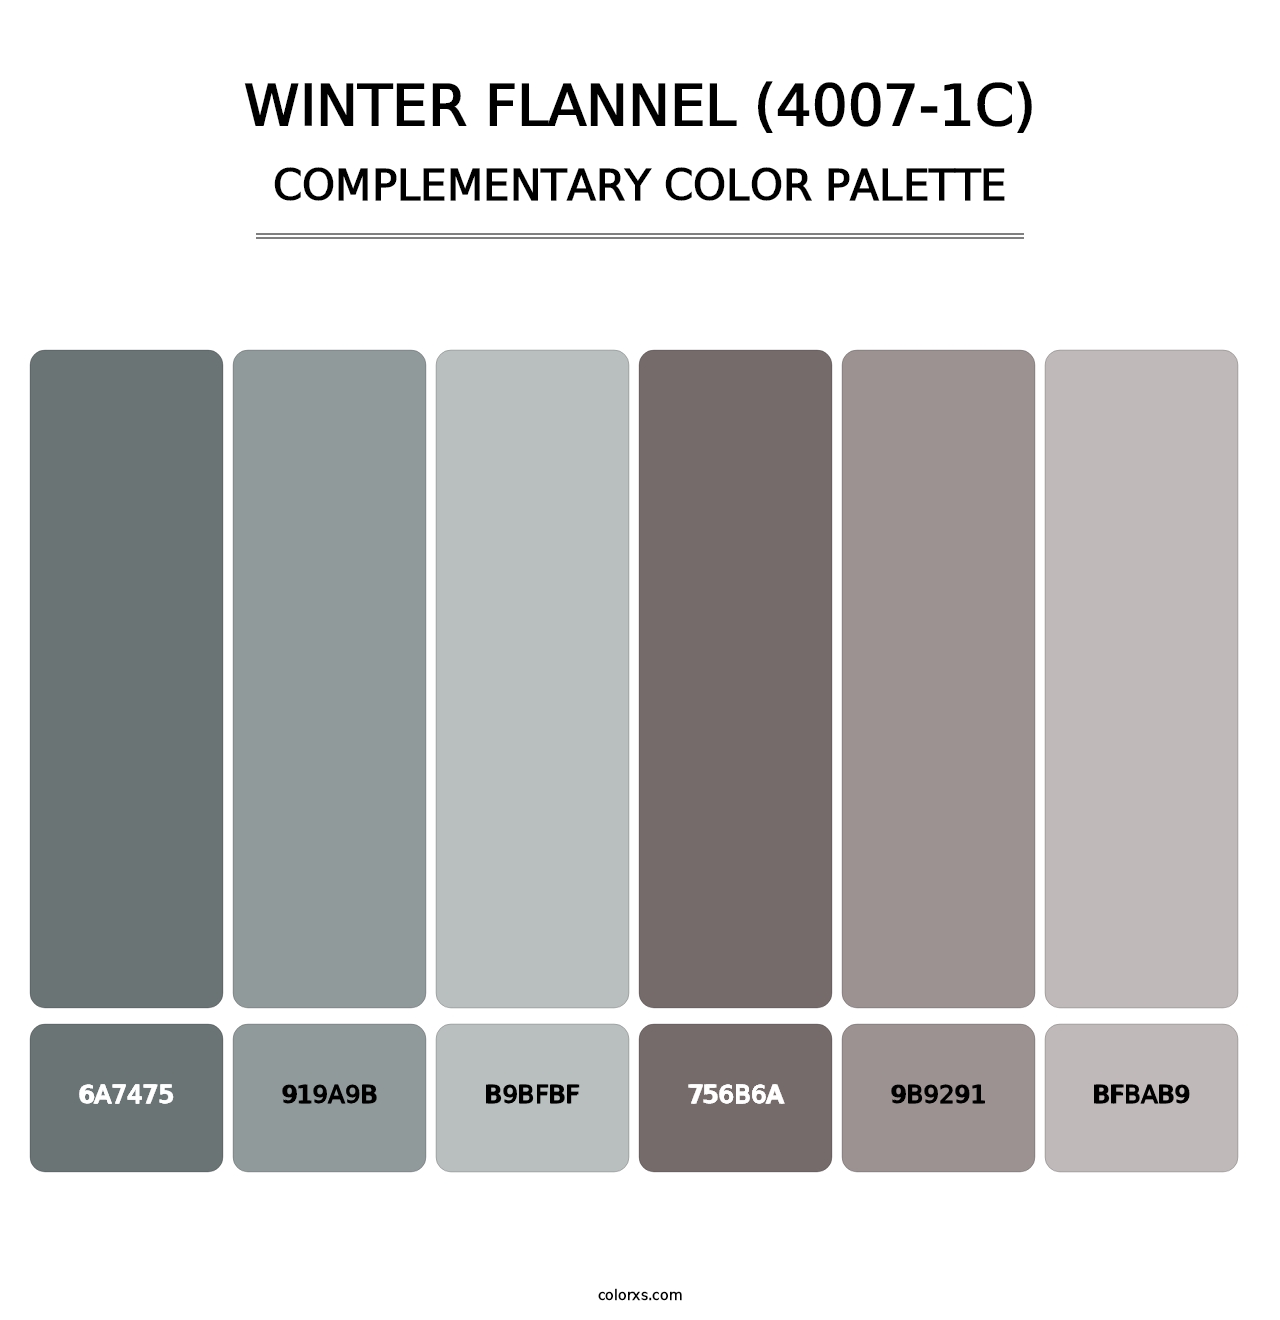 Winter Flannel (4007-1C) - Complementary Color Palette